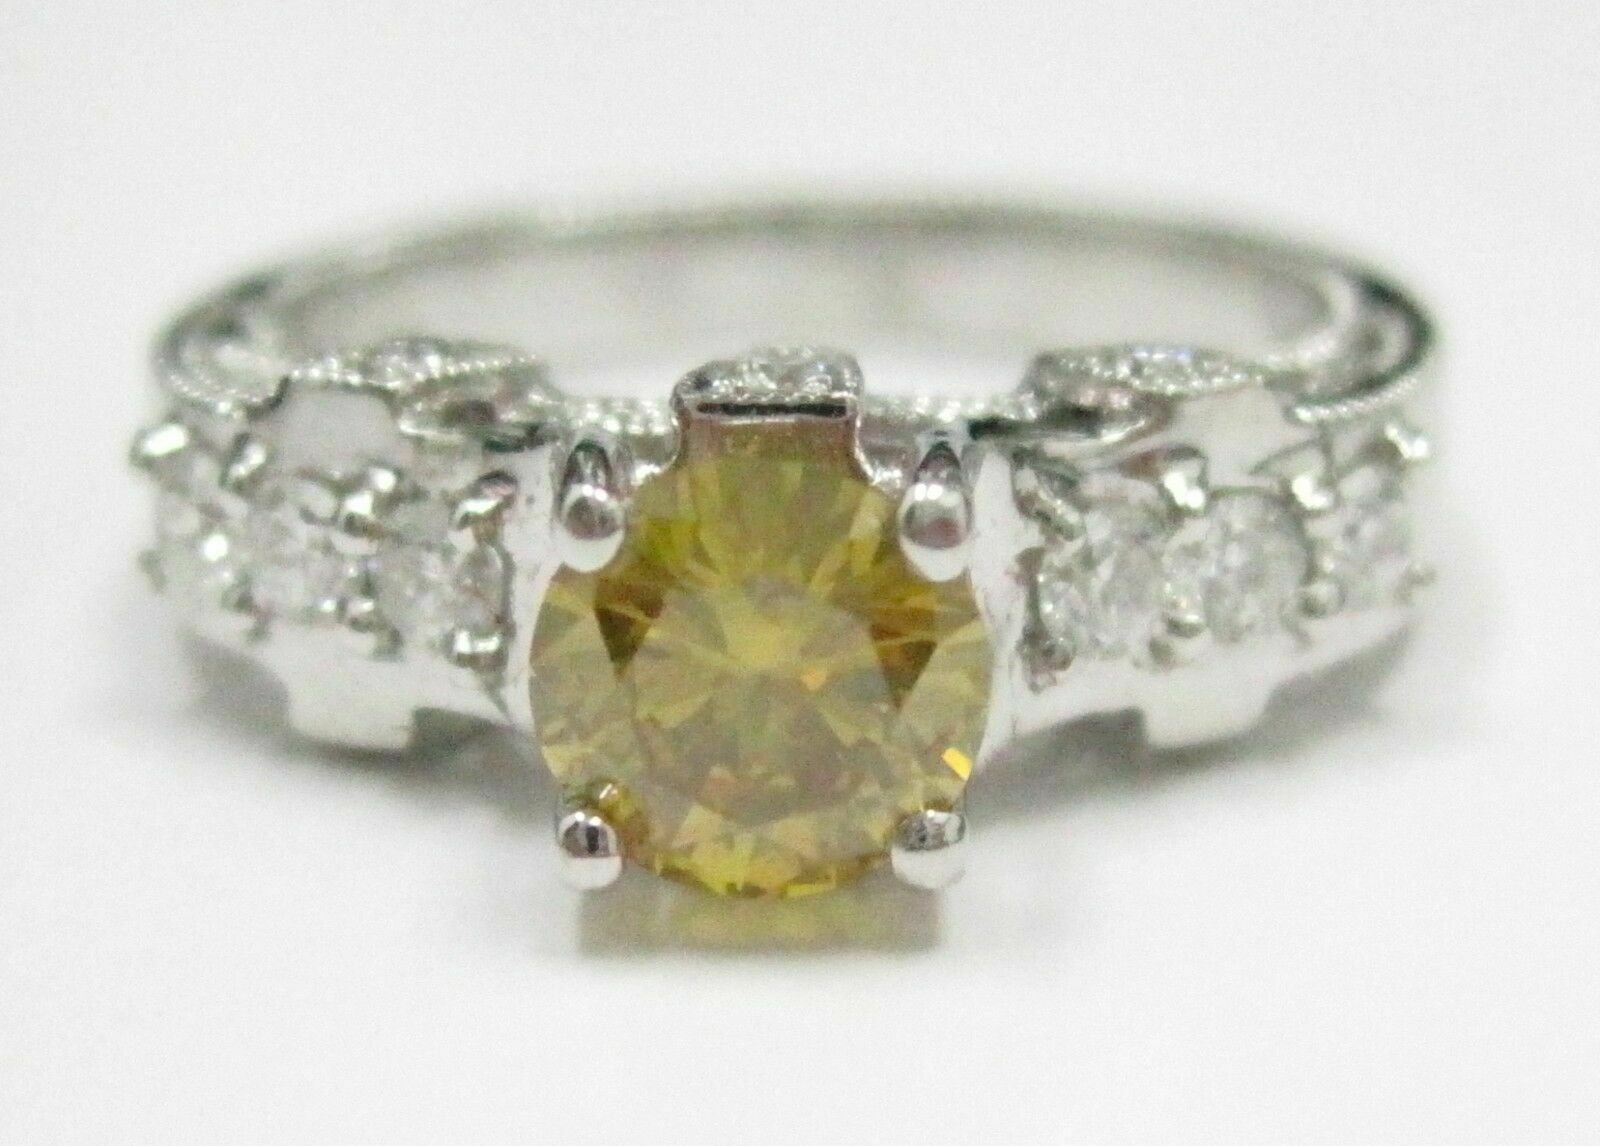 2.11 TCW HPHT Round Fancy Yellow Solitaire Diamond Engagement Ring 14kt WG